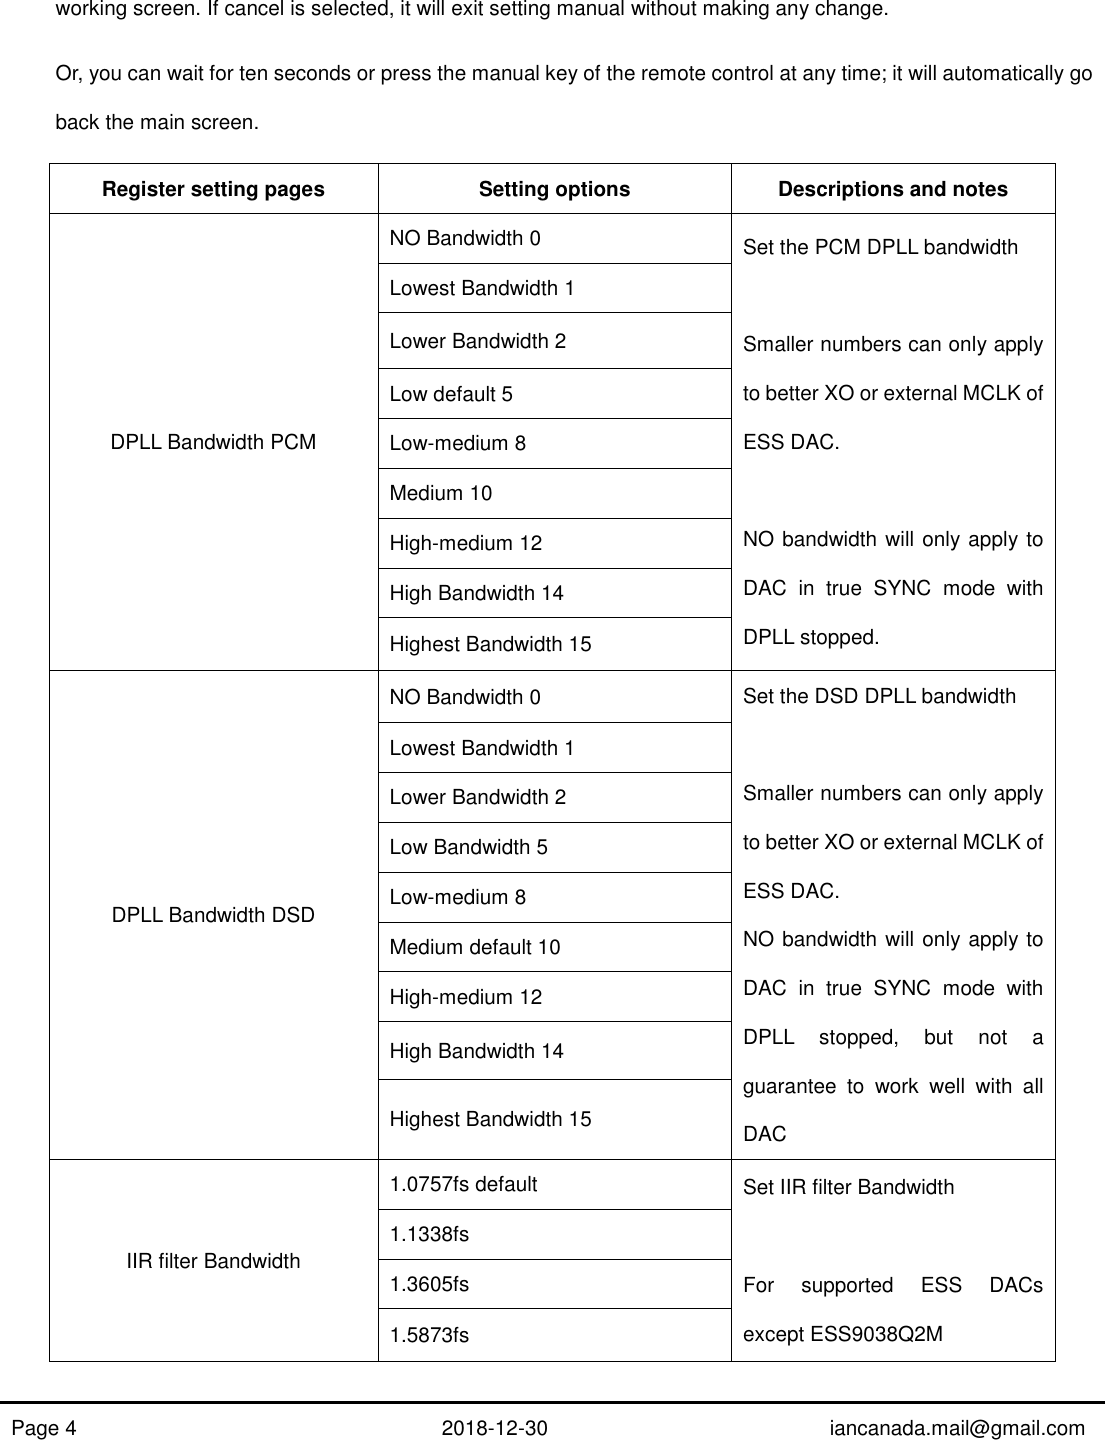 Page 4 of 11 - ESScontroller Manual